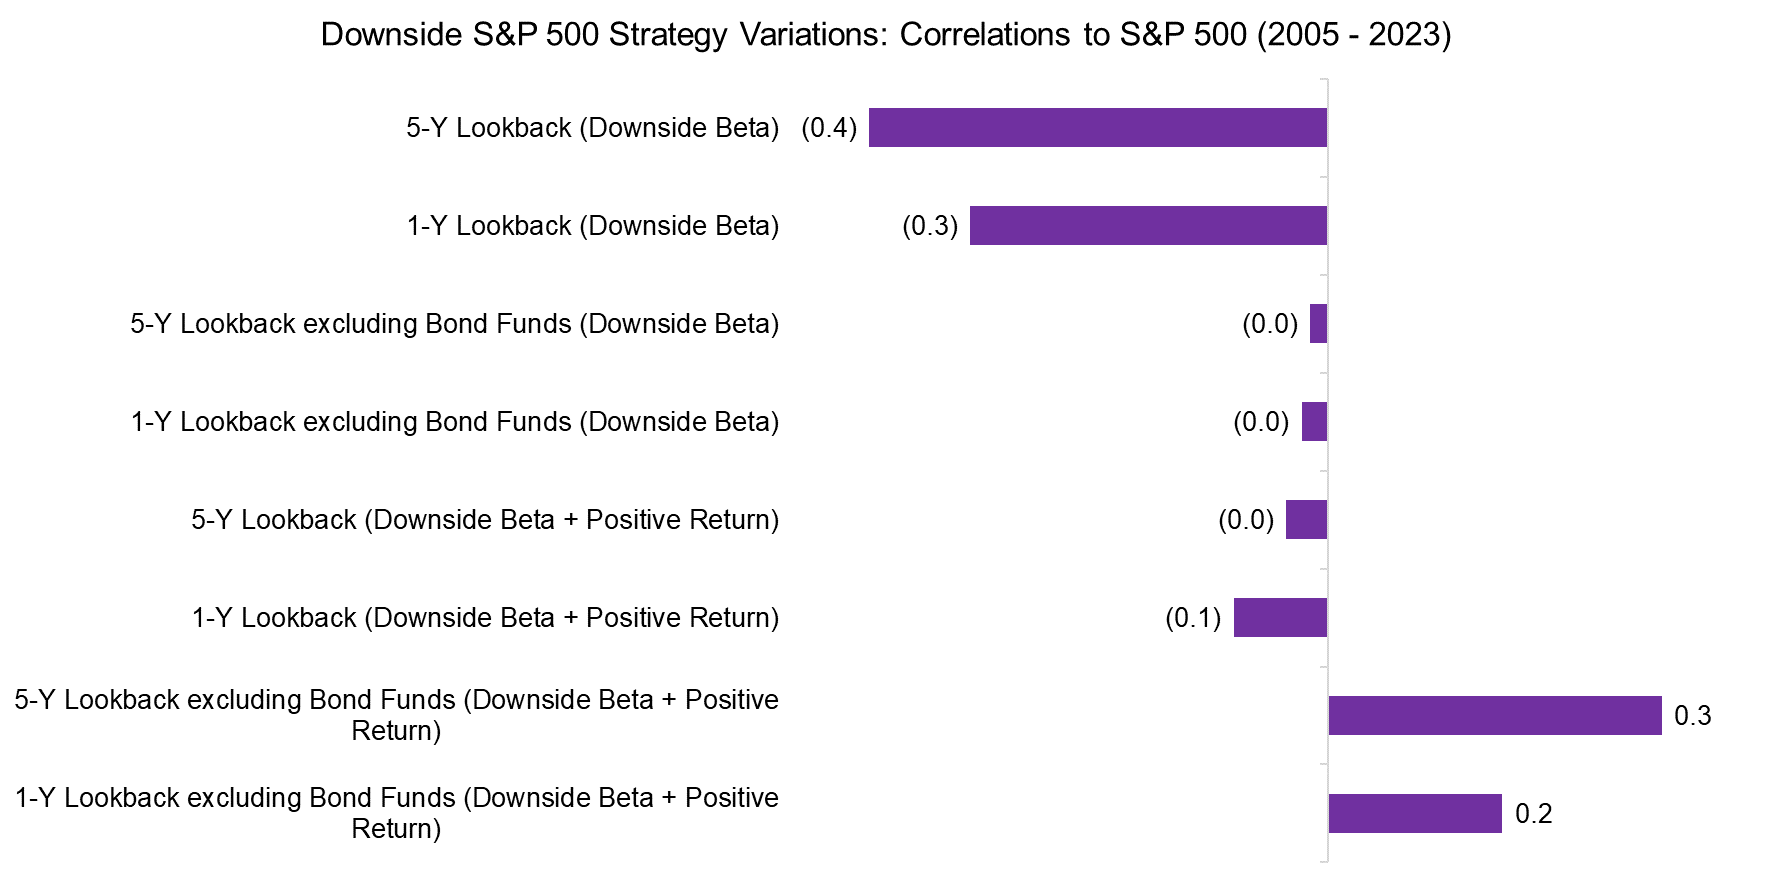 Downside S&P 500 Strategy Variations Correlations to S&P 500 (2005 - 2023)